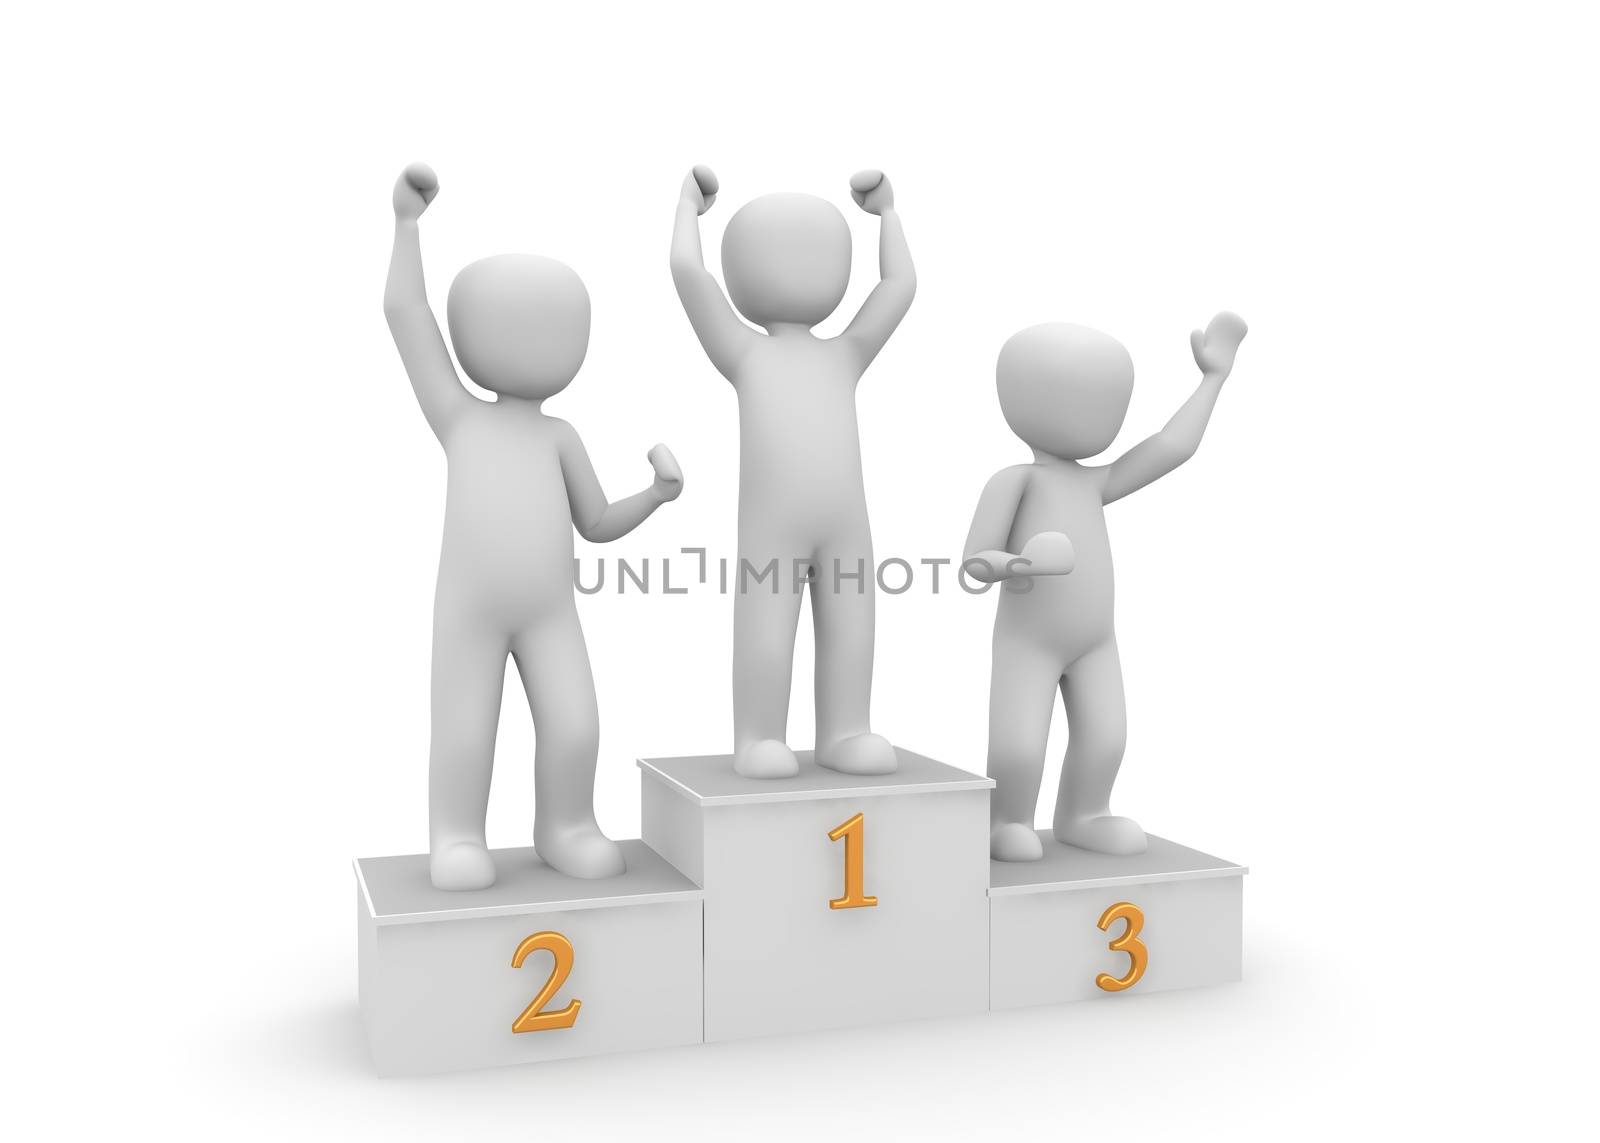 On the podium, there are three places to second and third and above the first.